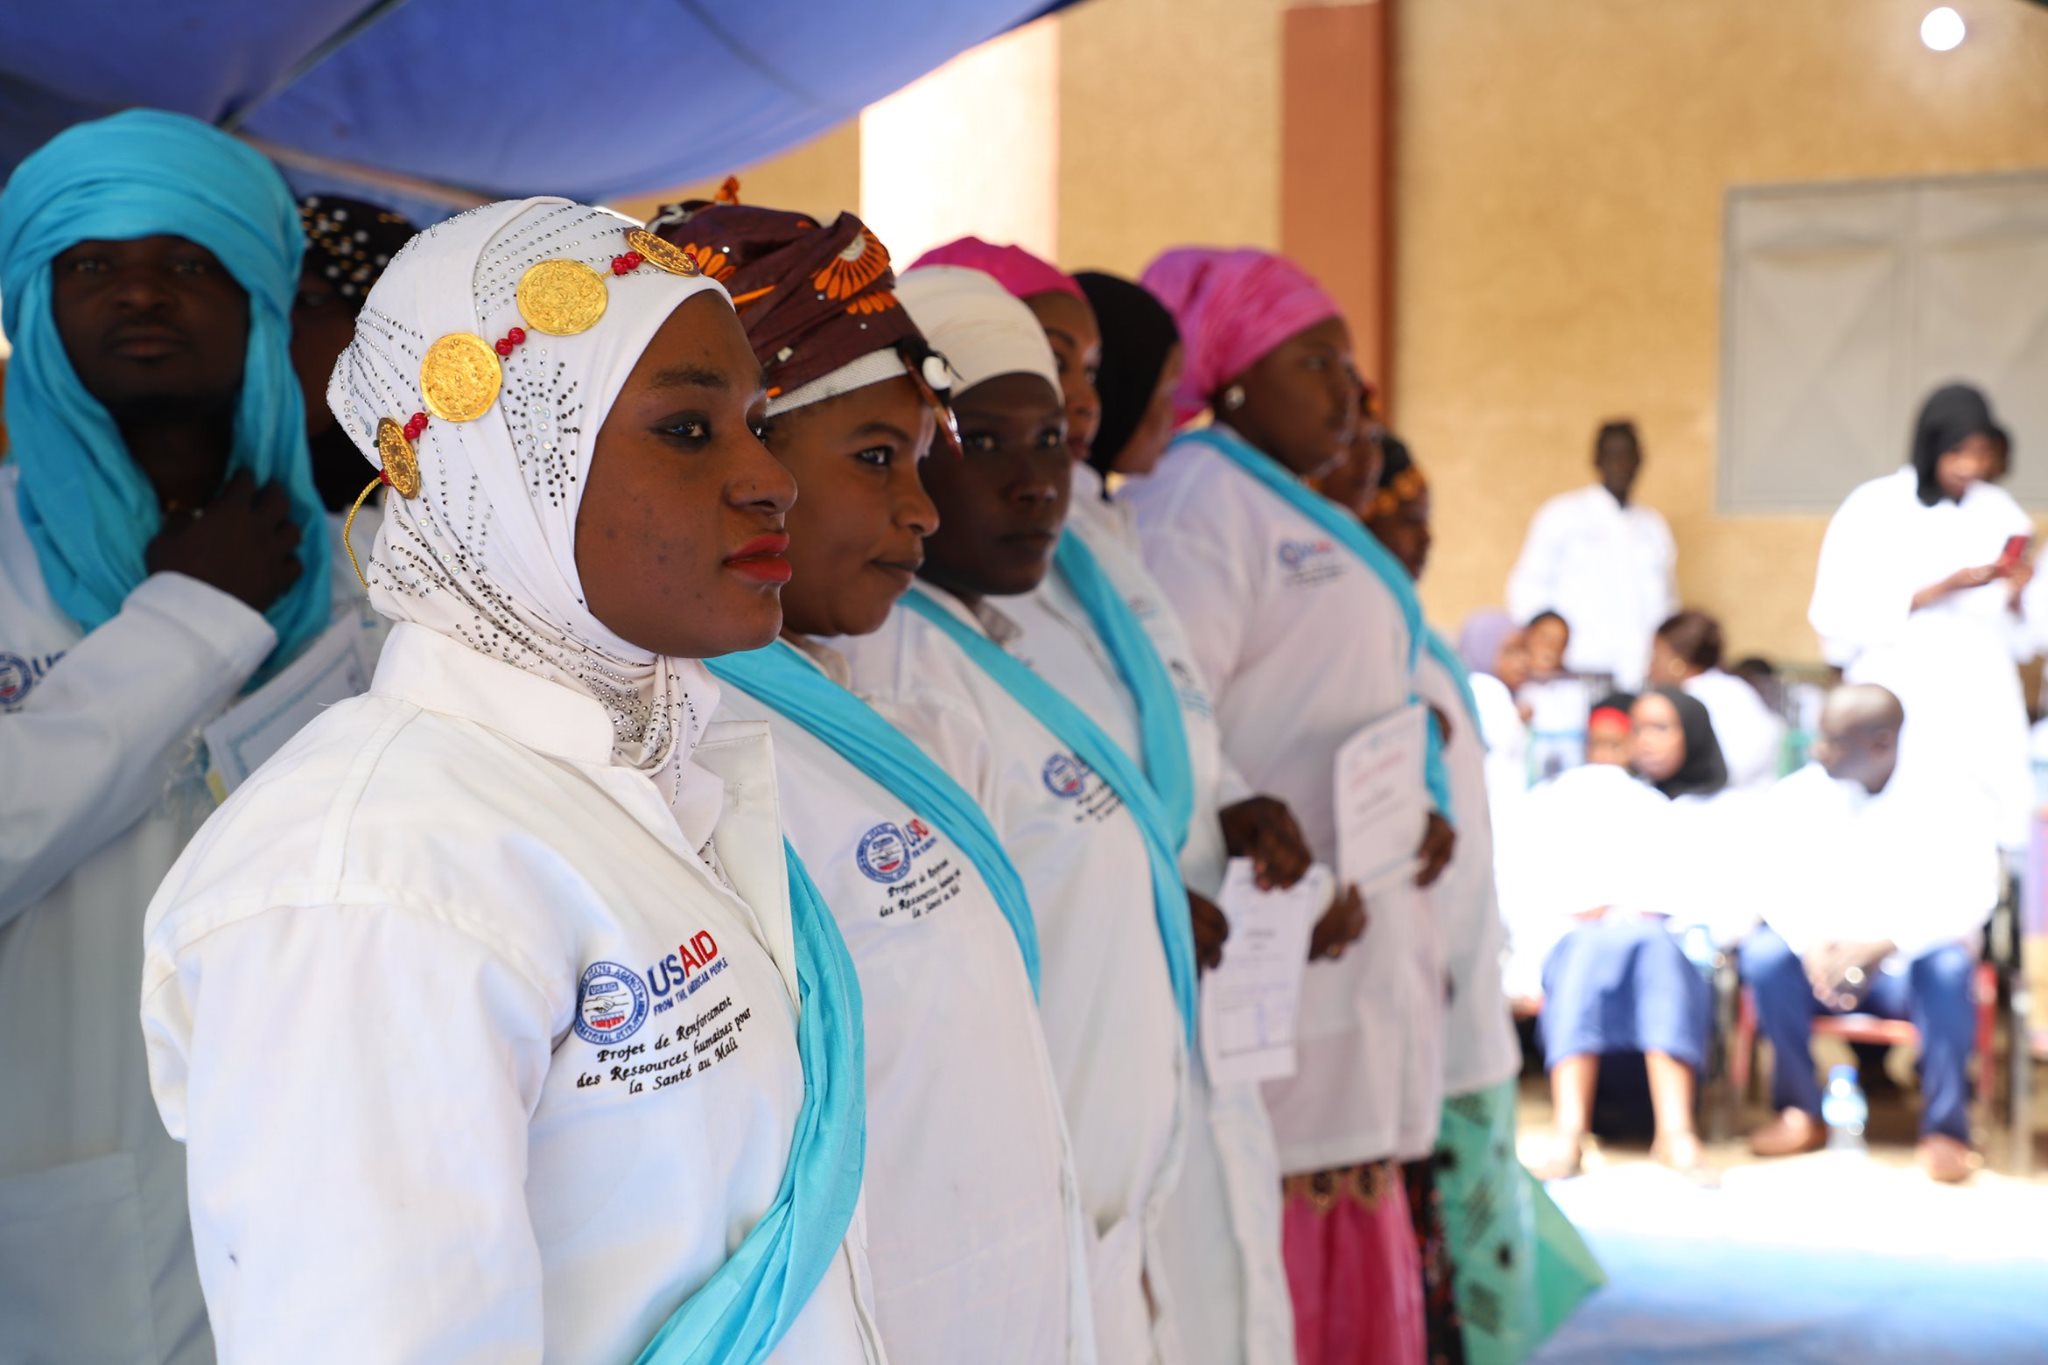 Health workers at their graduation ceremony in Gao, Mali in February 2020. Photo by Doucoure Sekou for IntraHealth International.